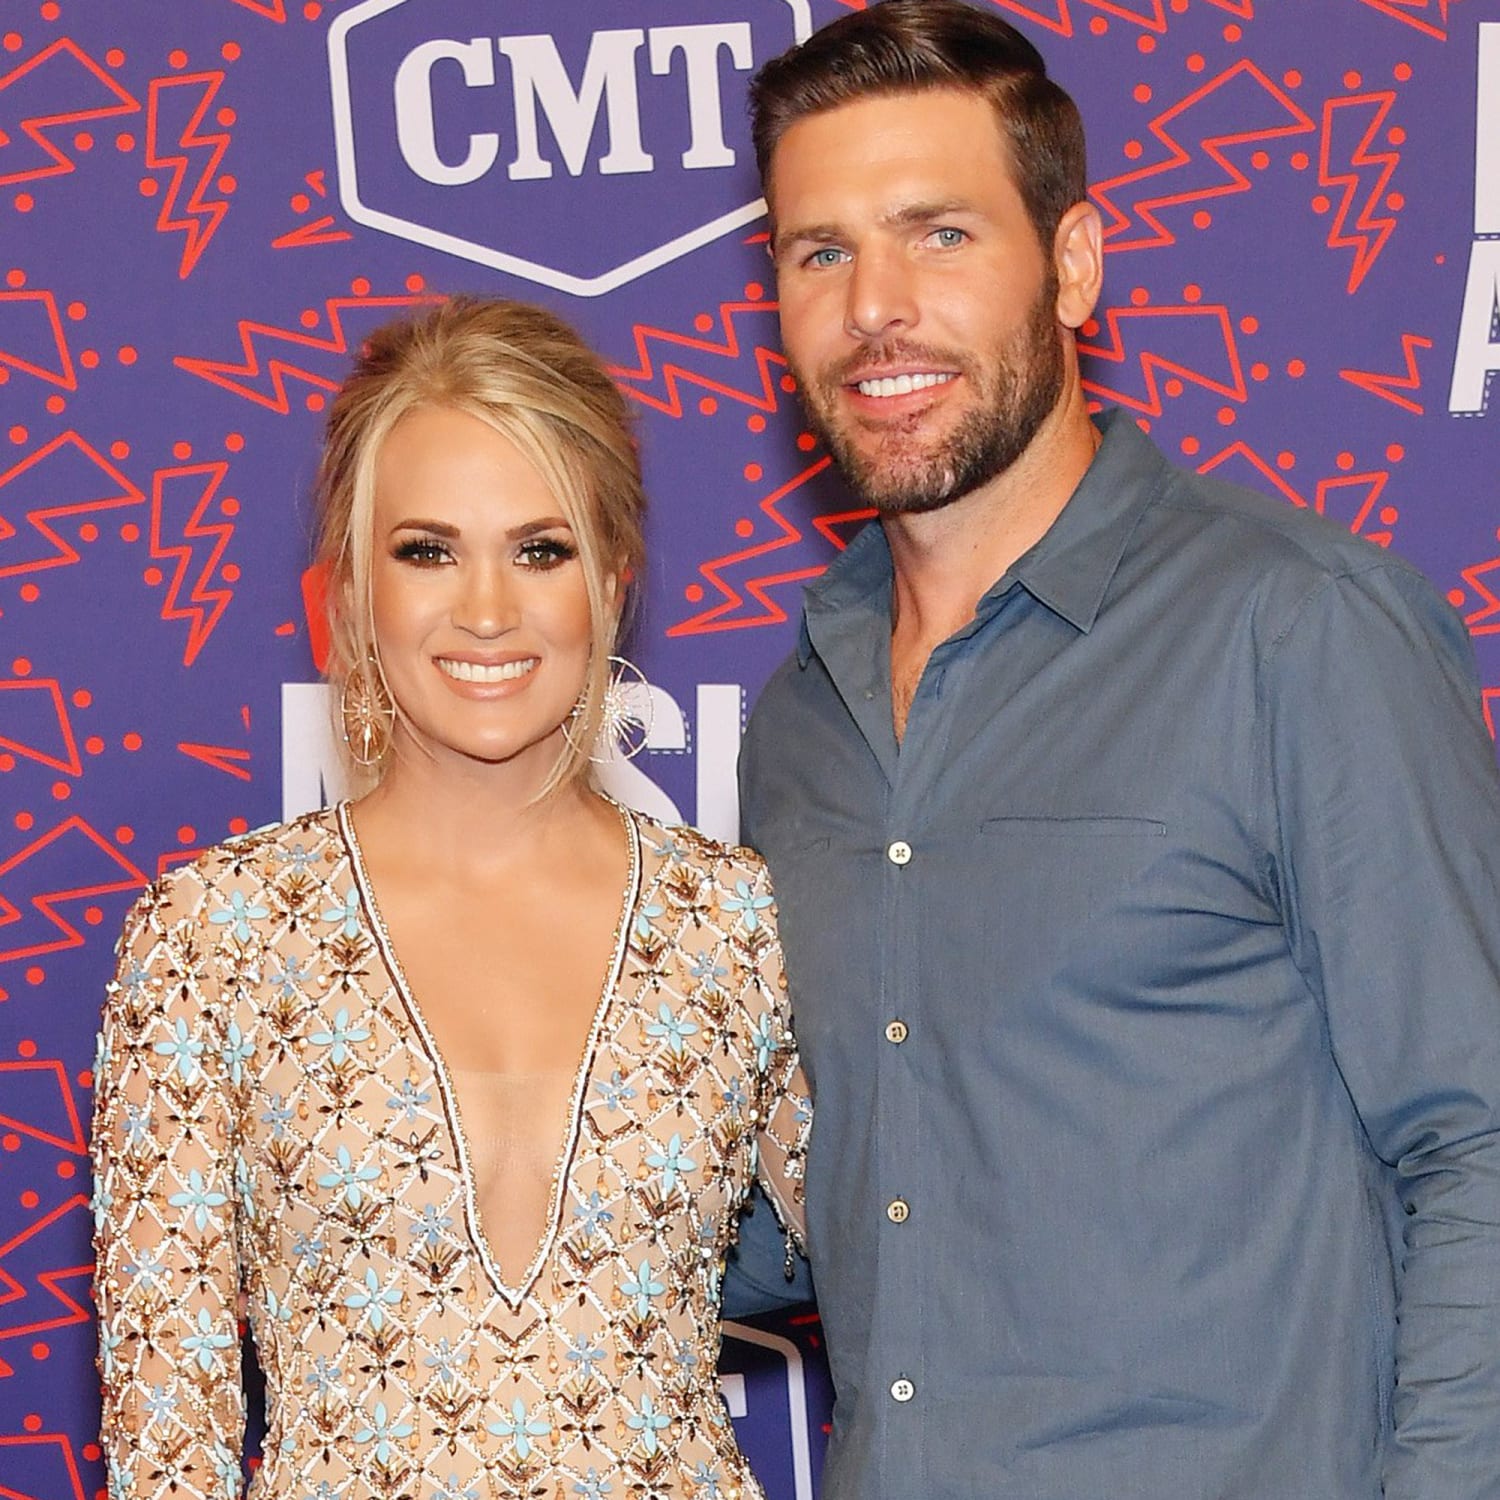 Carrie Underwood and Husband Mike Fisher Relationship Timeline